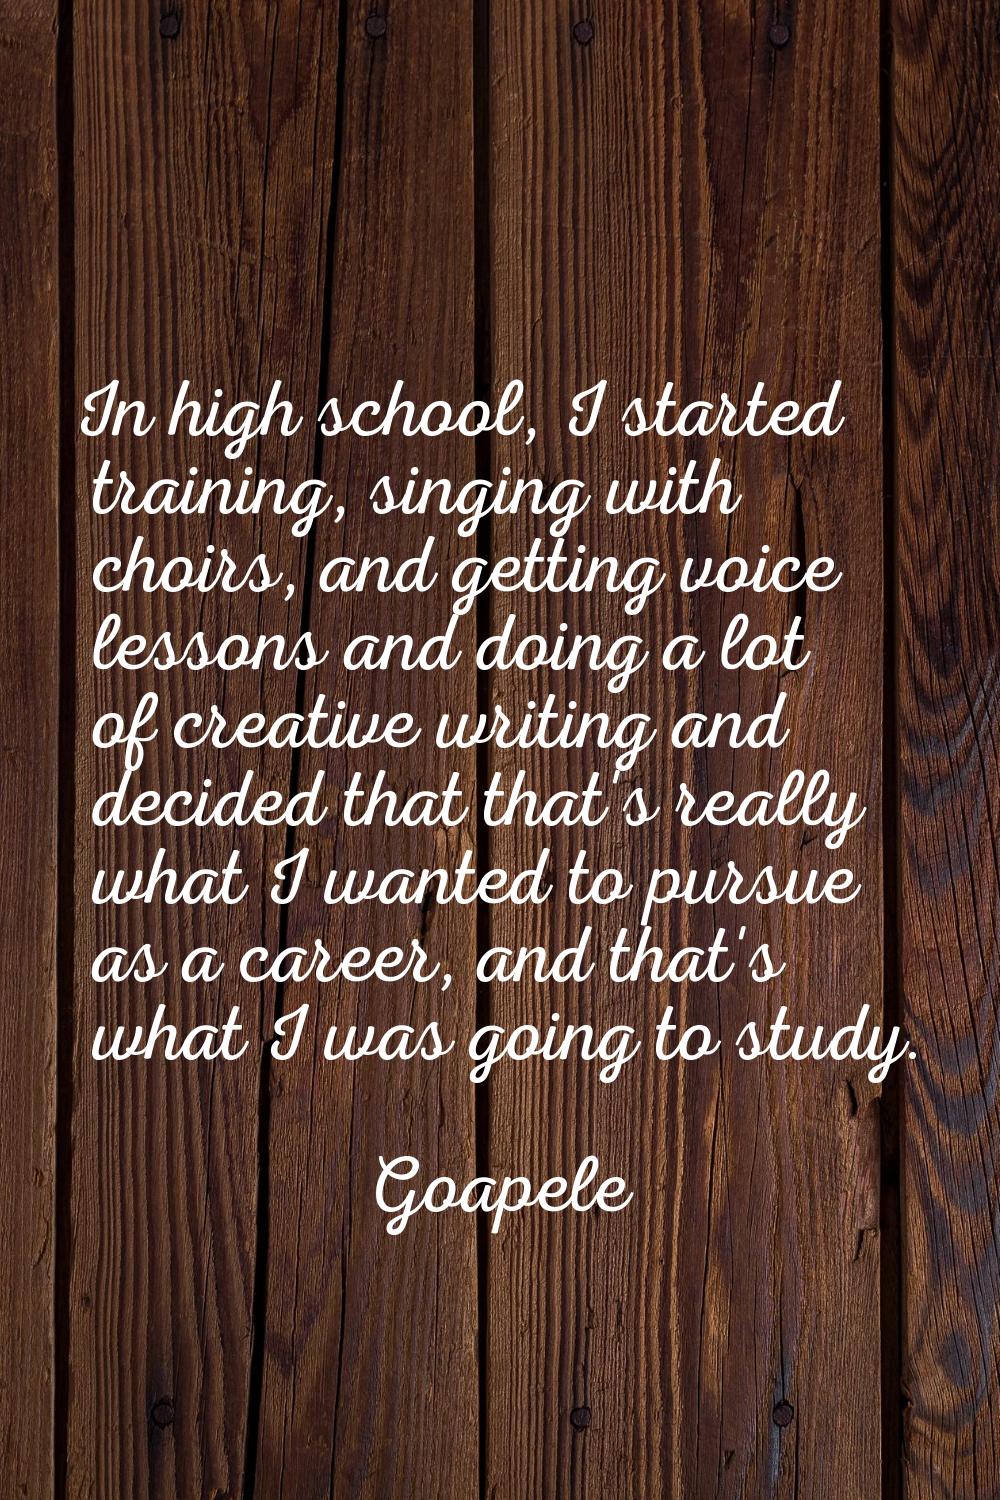 In high school, I started training, singing with choirs, and getting voice lessons and doing a lot 